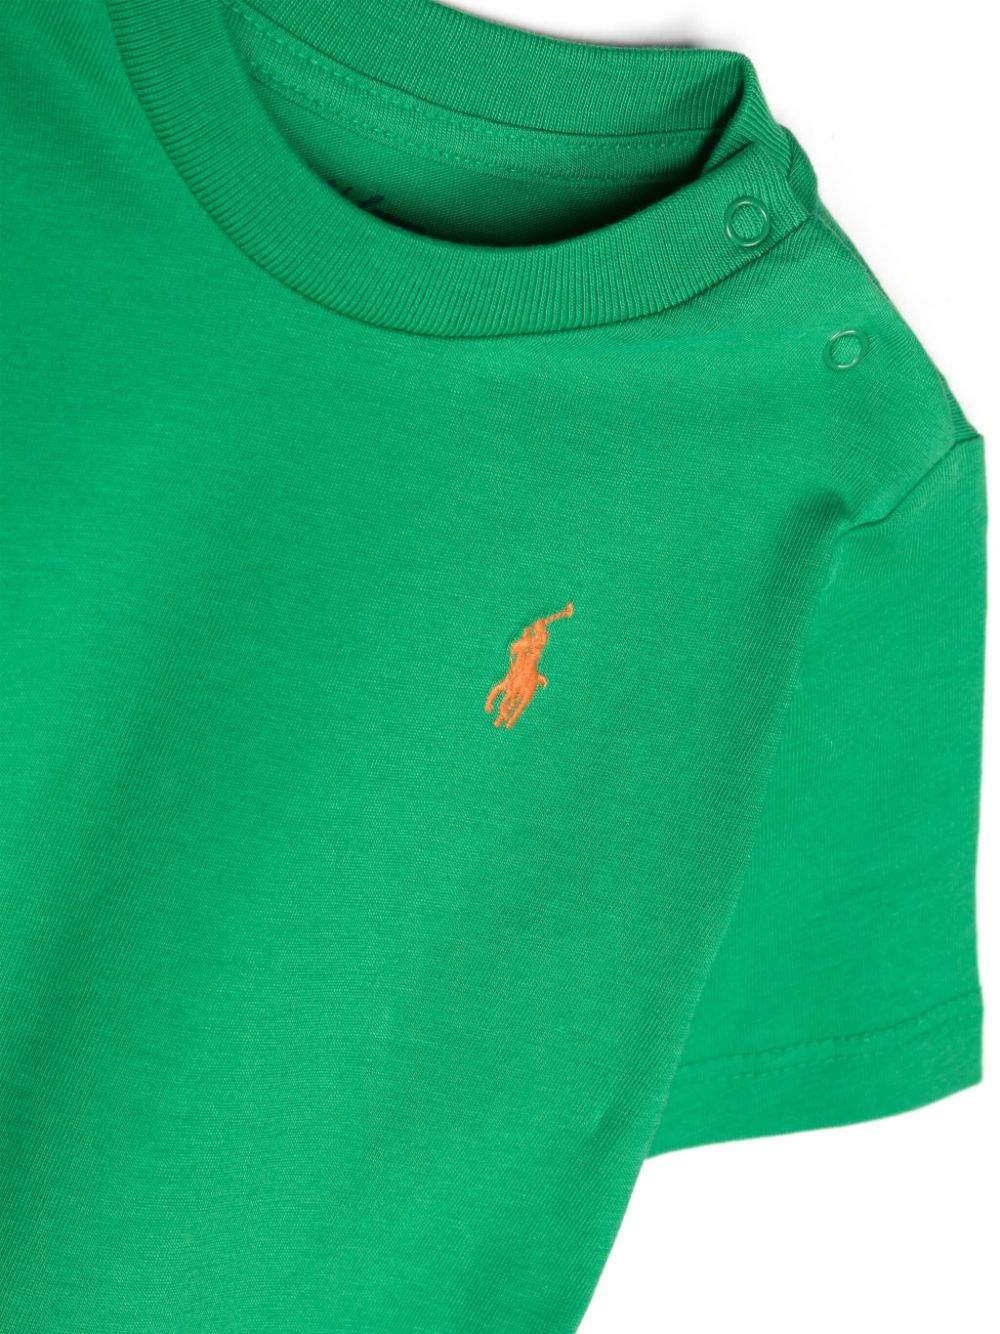 Green baby t-shirt with logo